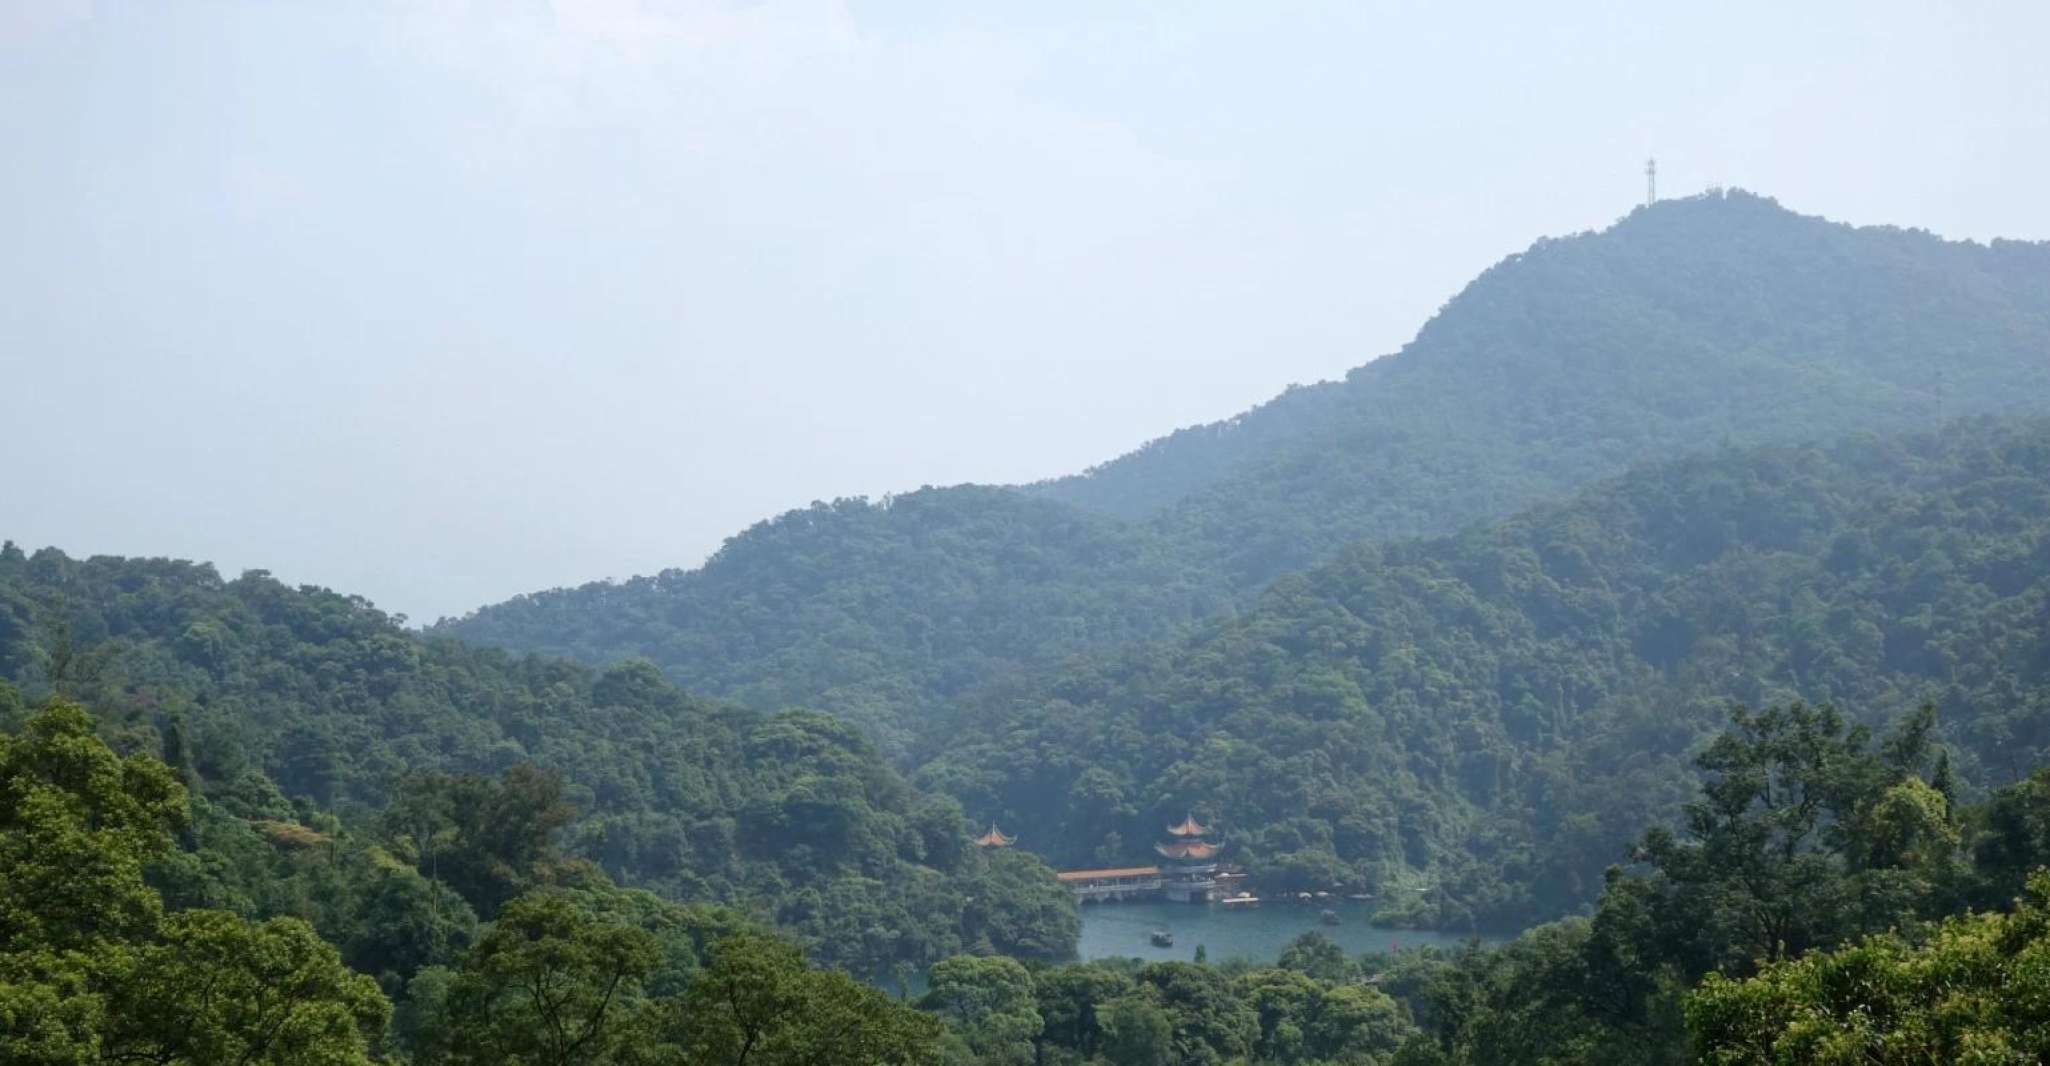 From Guangzhou, Zhaoqing Full-Day Private Tour - Housity